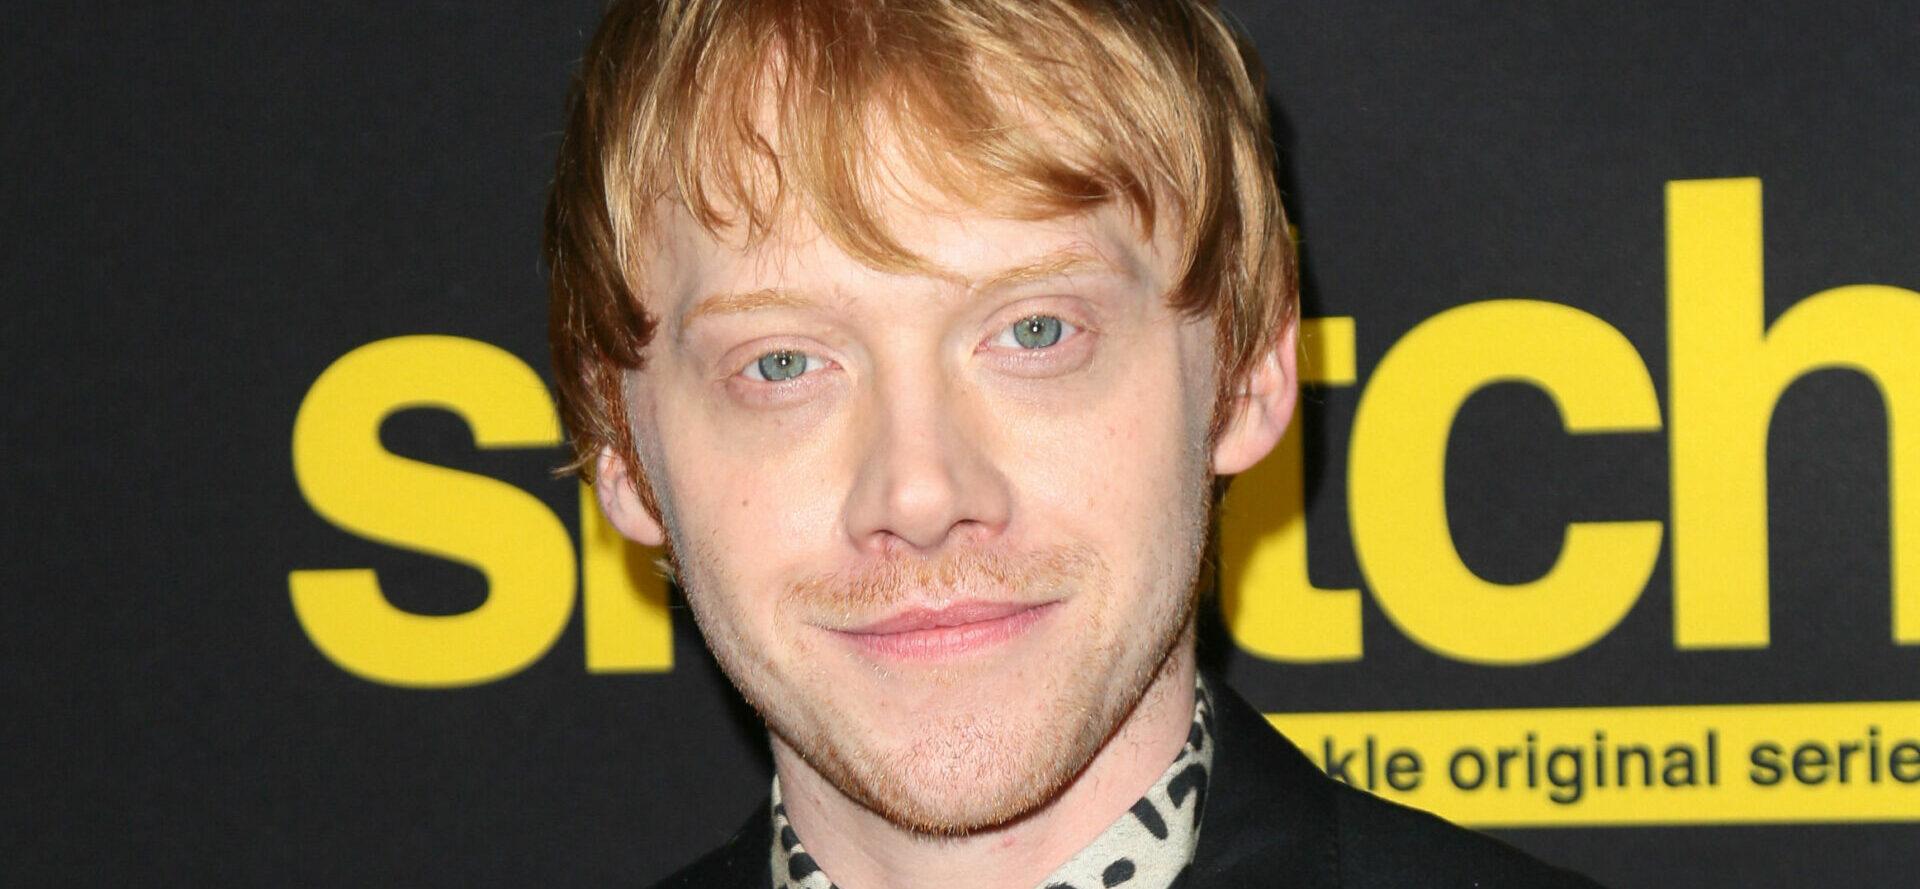 Rupert Grint at the Premiere Screening of Crackle's 'Snatch'